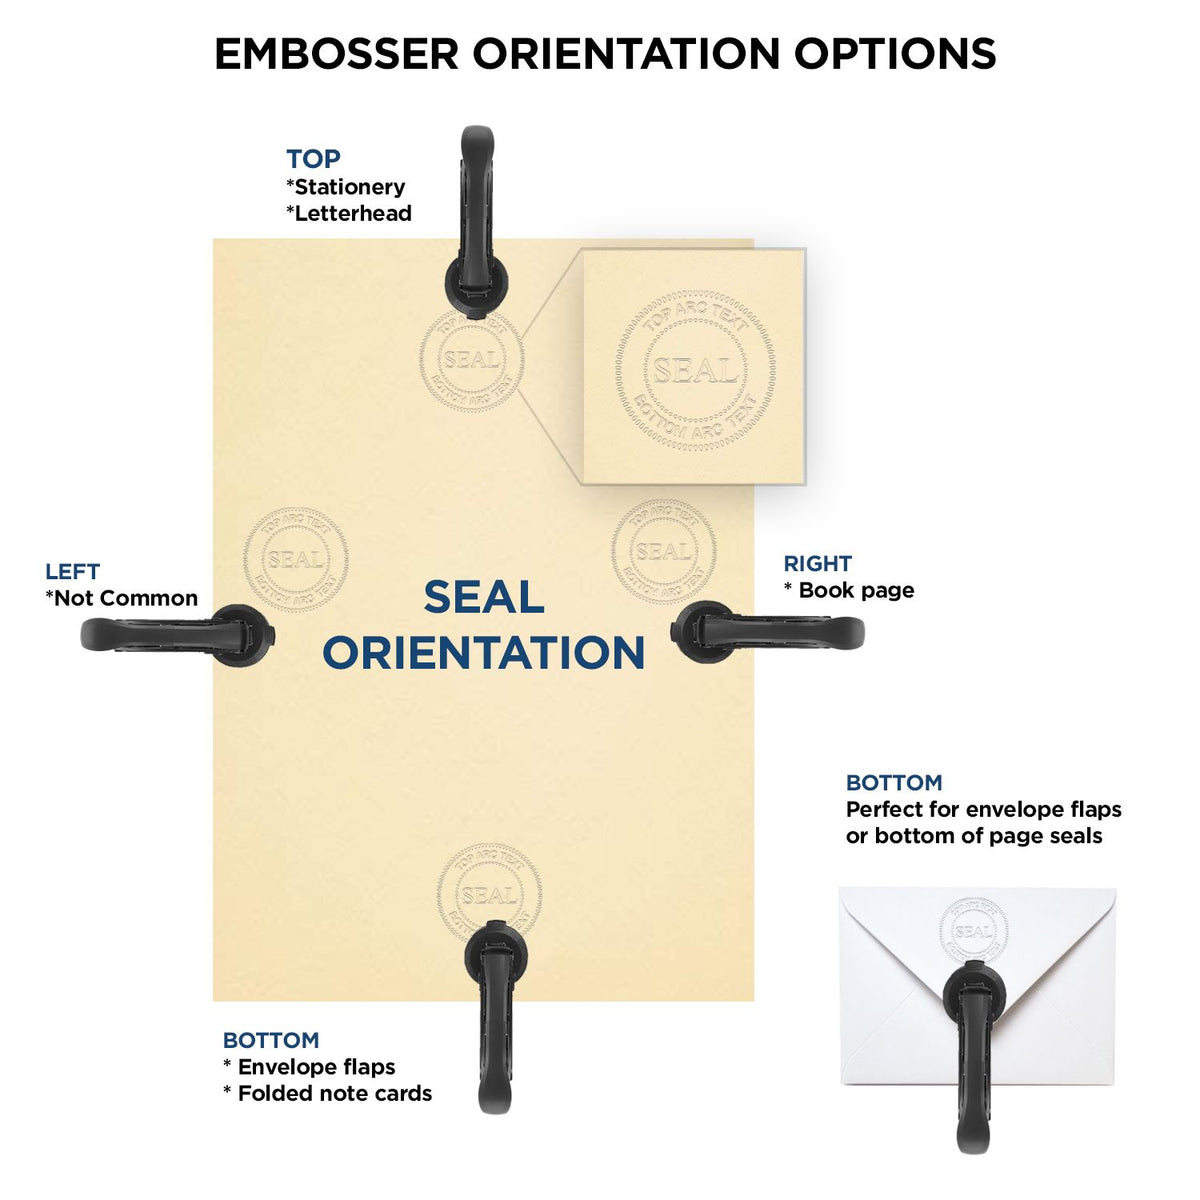 An infographic for the State of Vermont Extended Long Reach Engineer Seal showing embosser orientation, this is showing examples of a top, bottom, right and left insert.